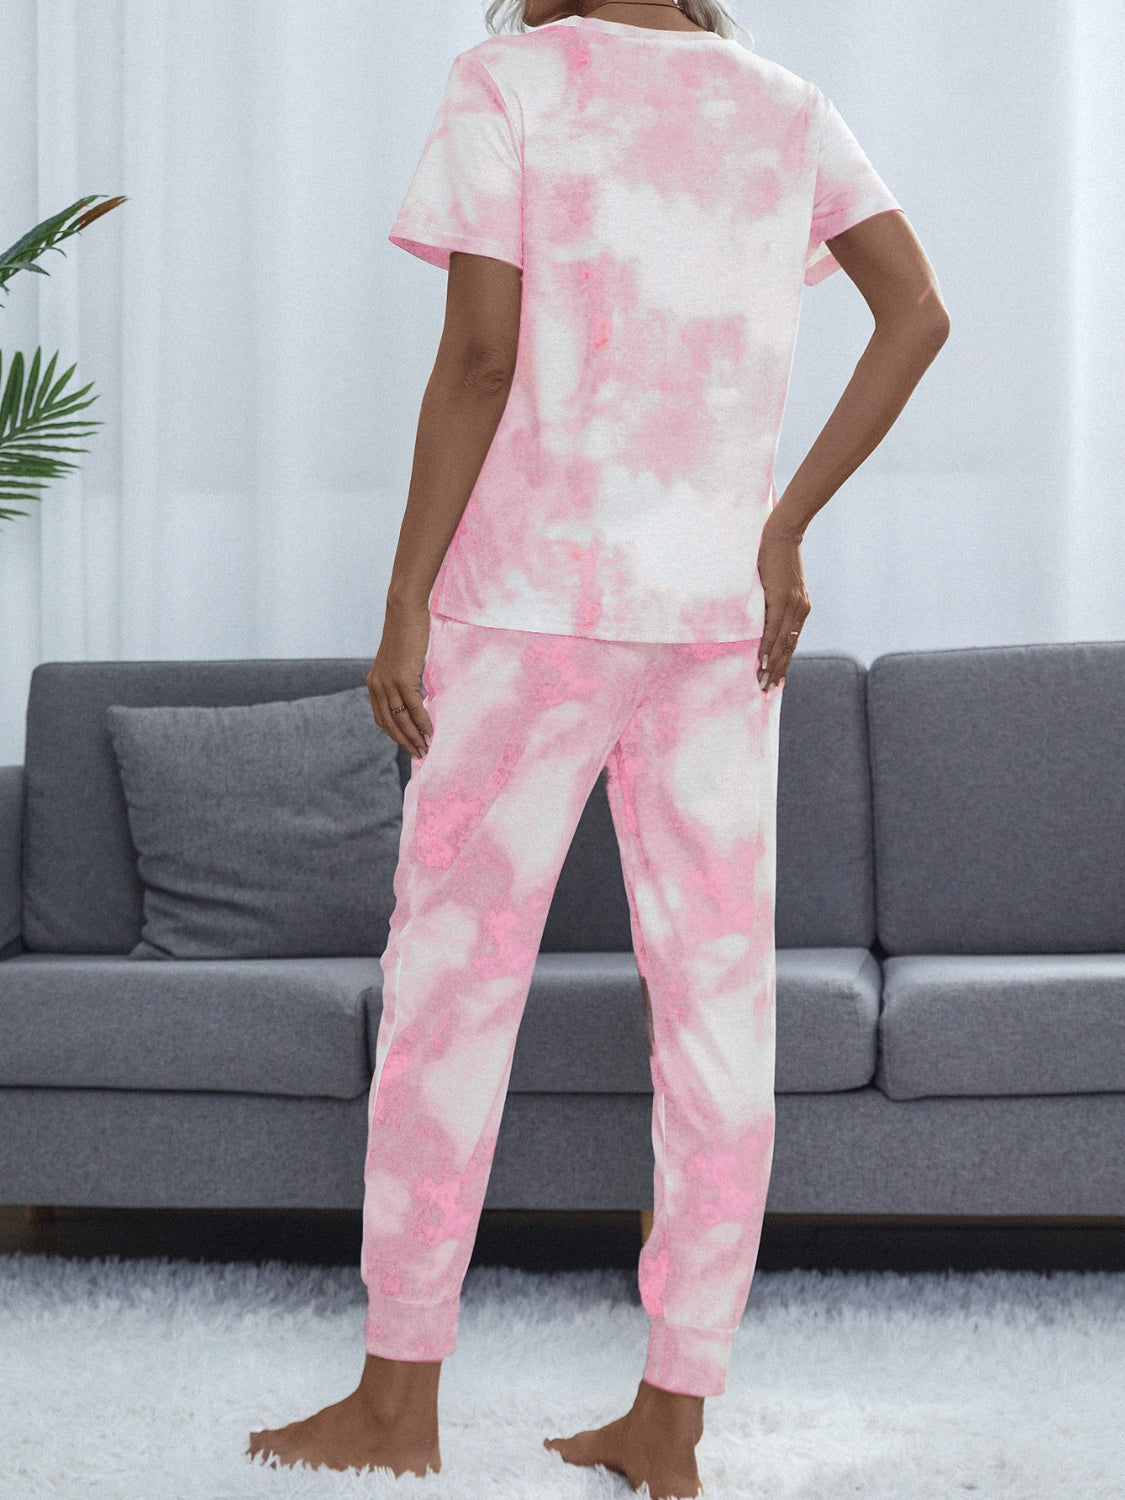 Tie-Dye Round Neck Short Sleeve Top and Pants